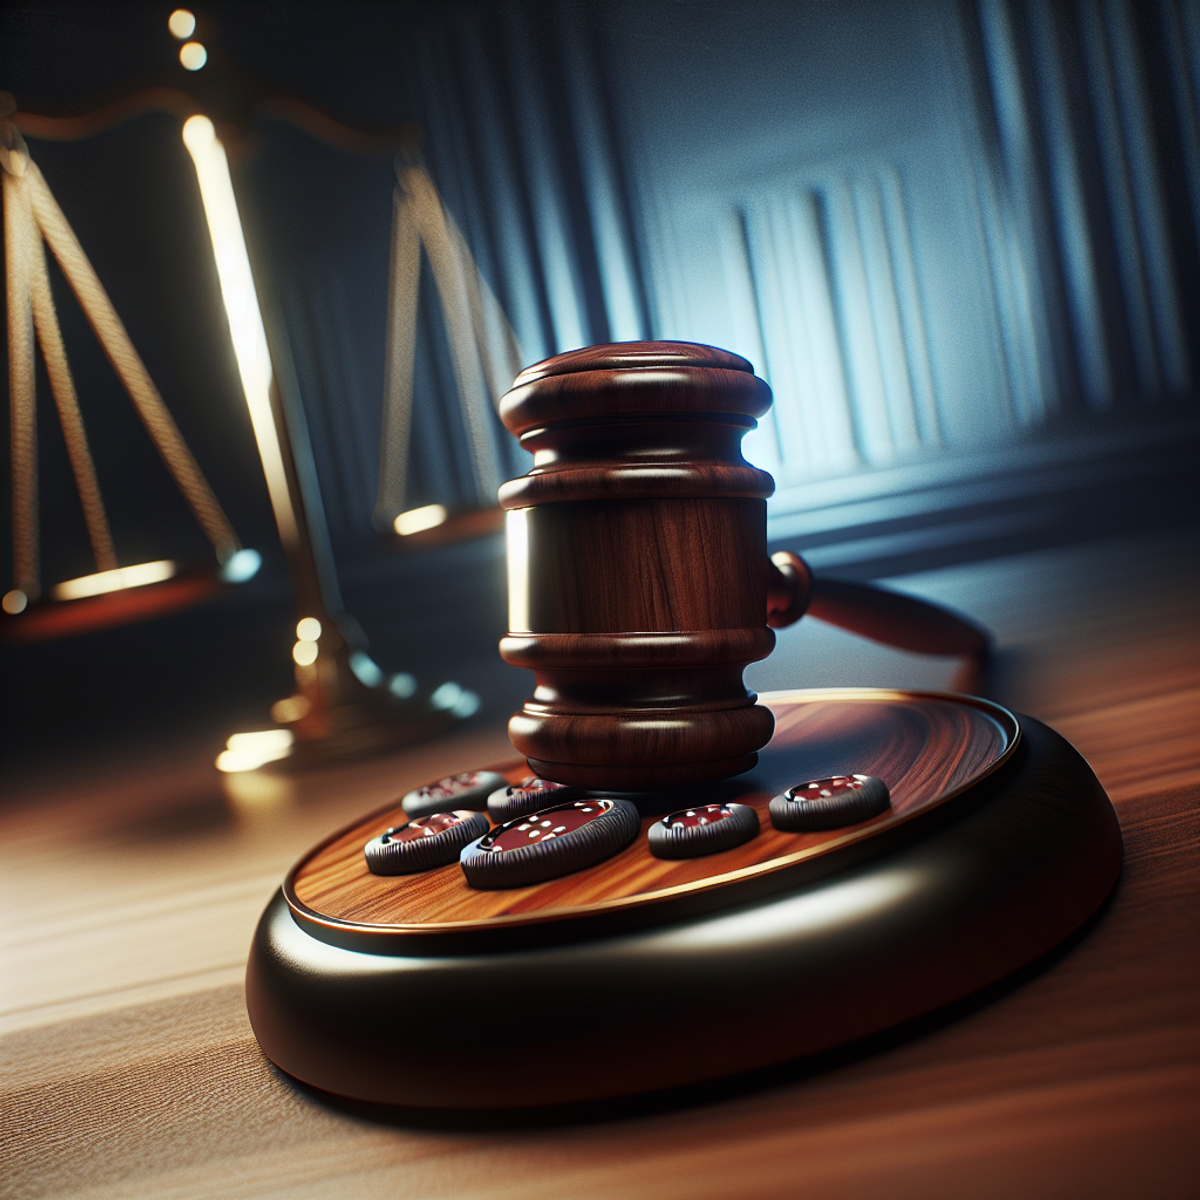 A close-up shot of a gavel with dramatic lighting and detailed wood patterns, conveying the severity of illegal gambling activities.